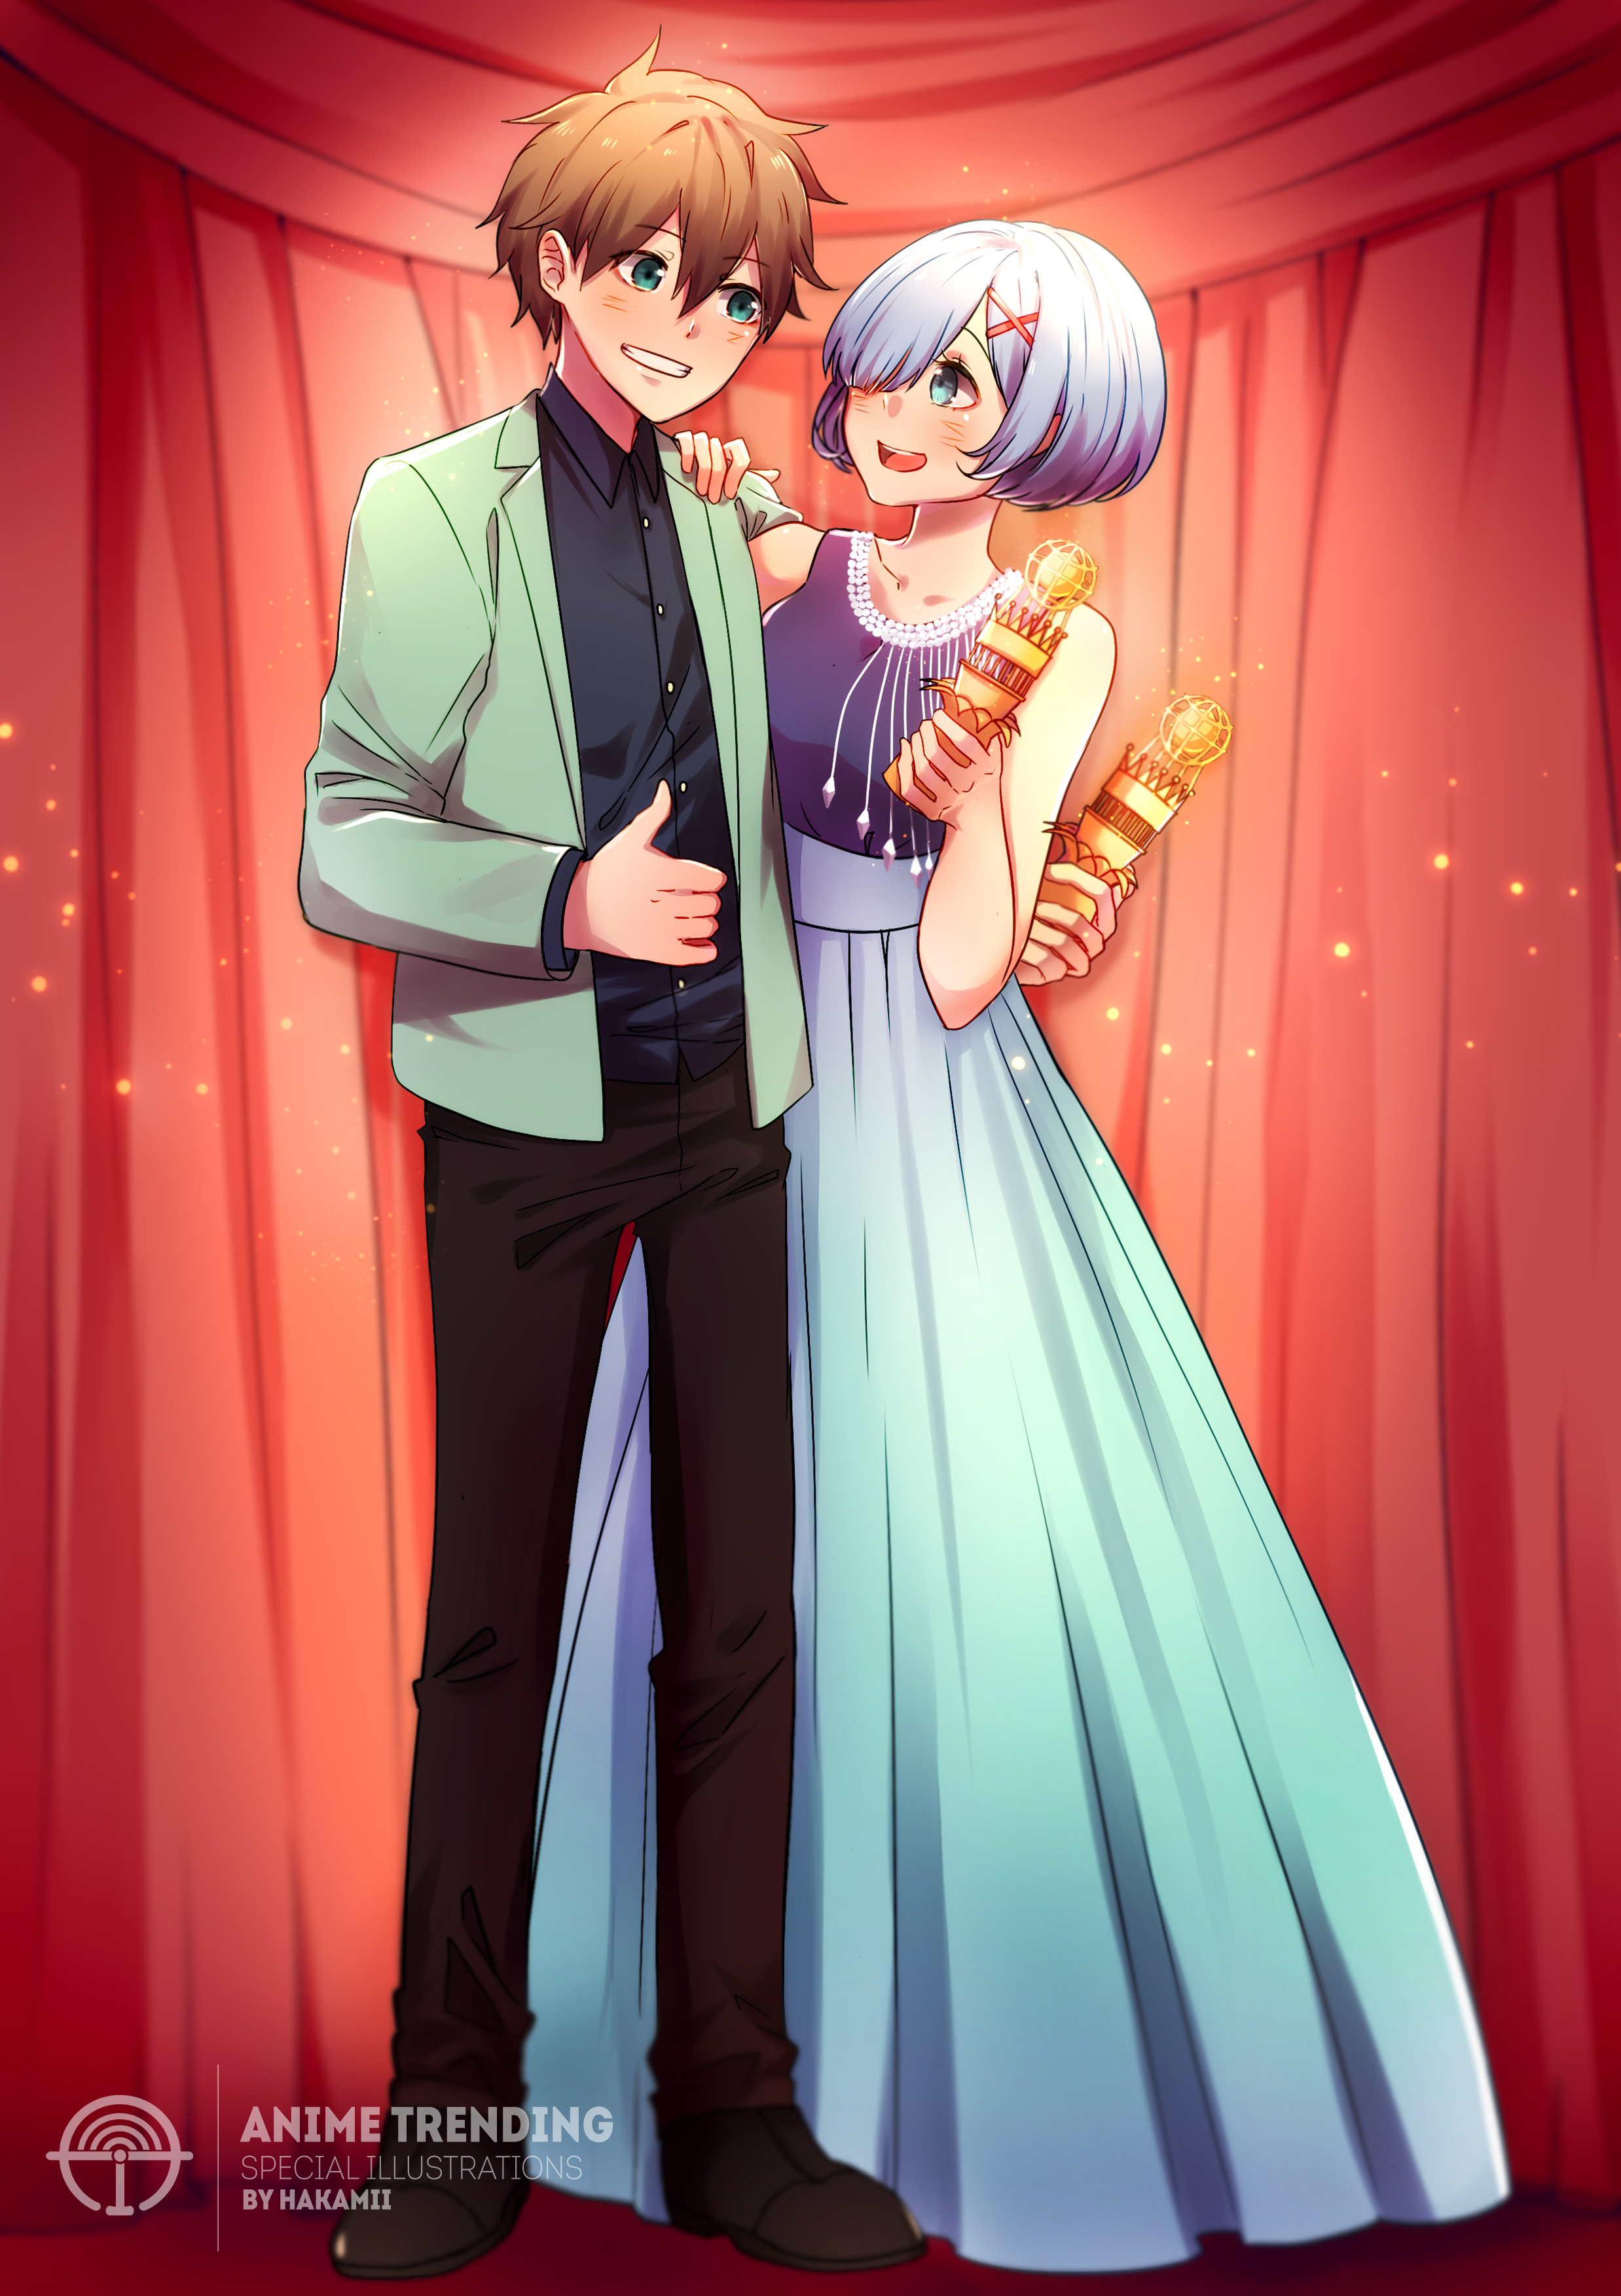 Kazuma Satou and Rem dethrones last year's King and Queen